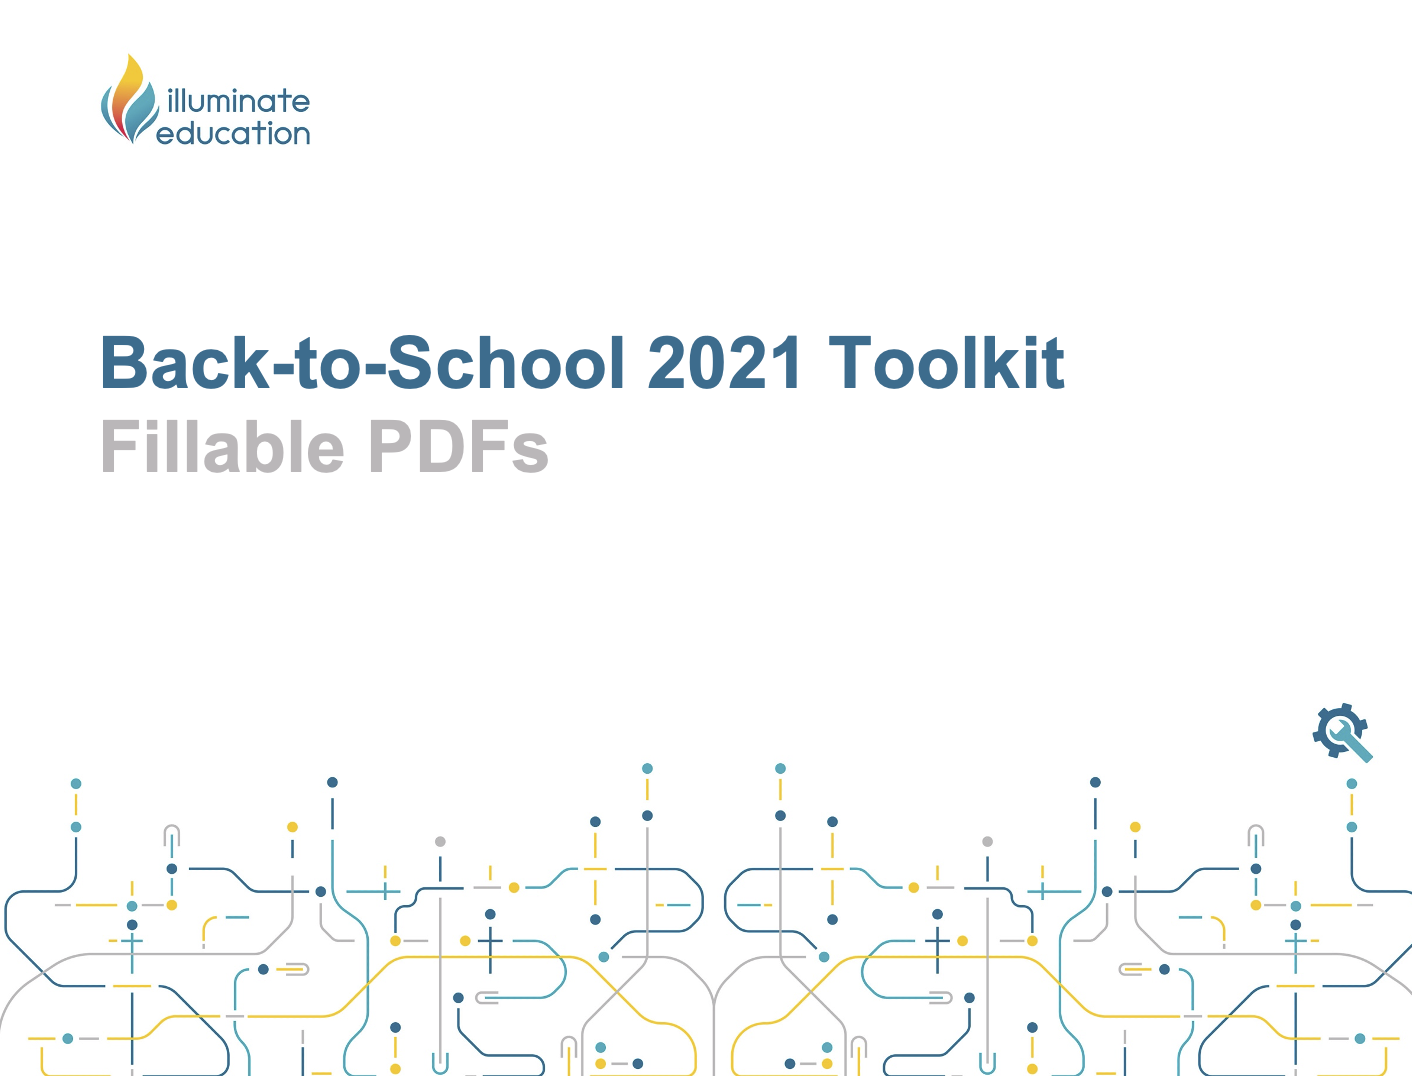 Back-to-School 2021 Toolkit Fillable PDFs